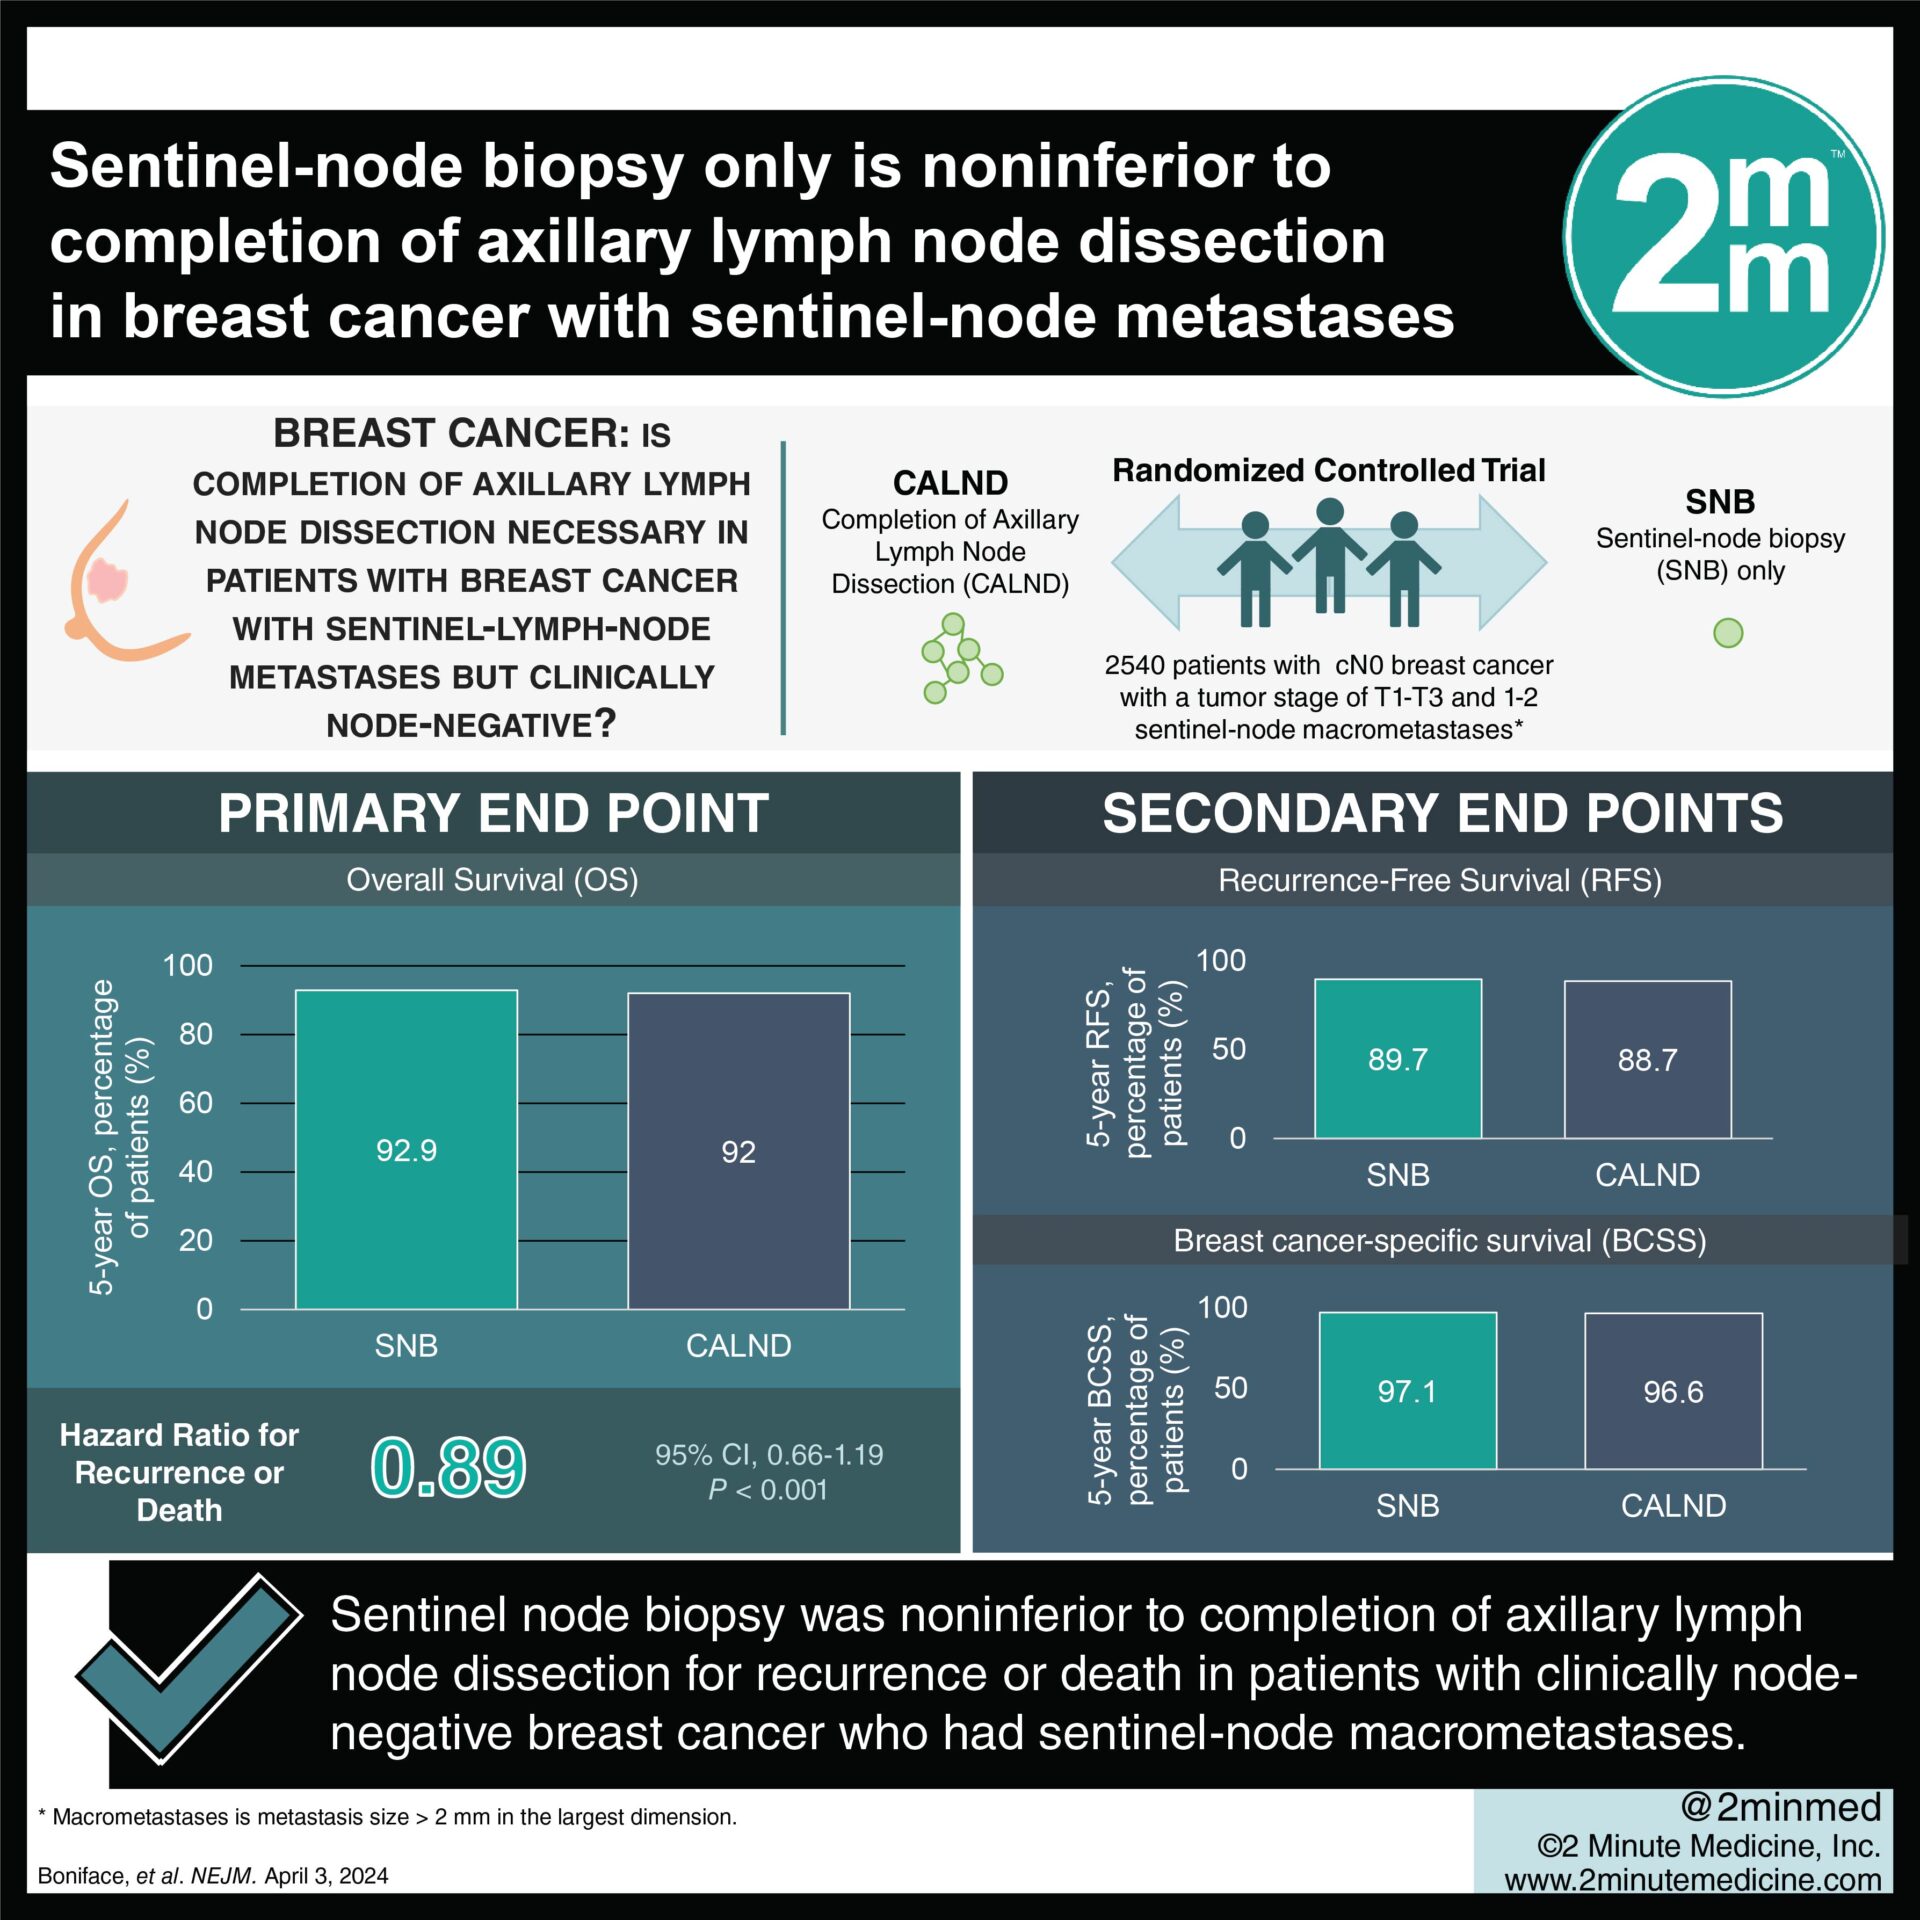 #VisualAbstract: Sentinel-node biopsy only is noninferior to completion of axillary lymph node dissection in breast cancer with sentinel-node metastases